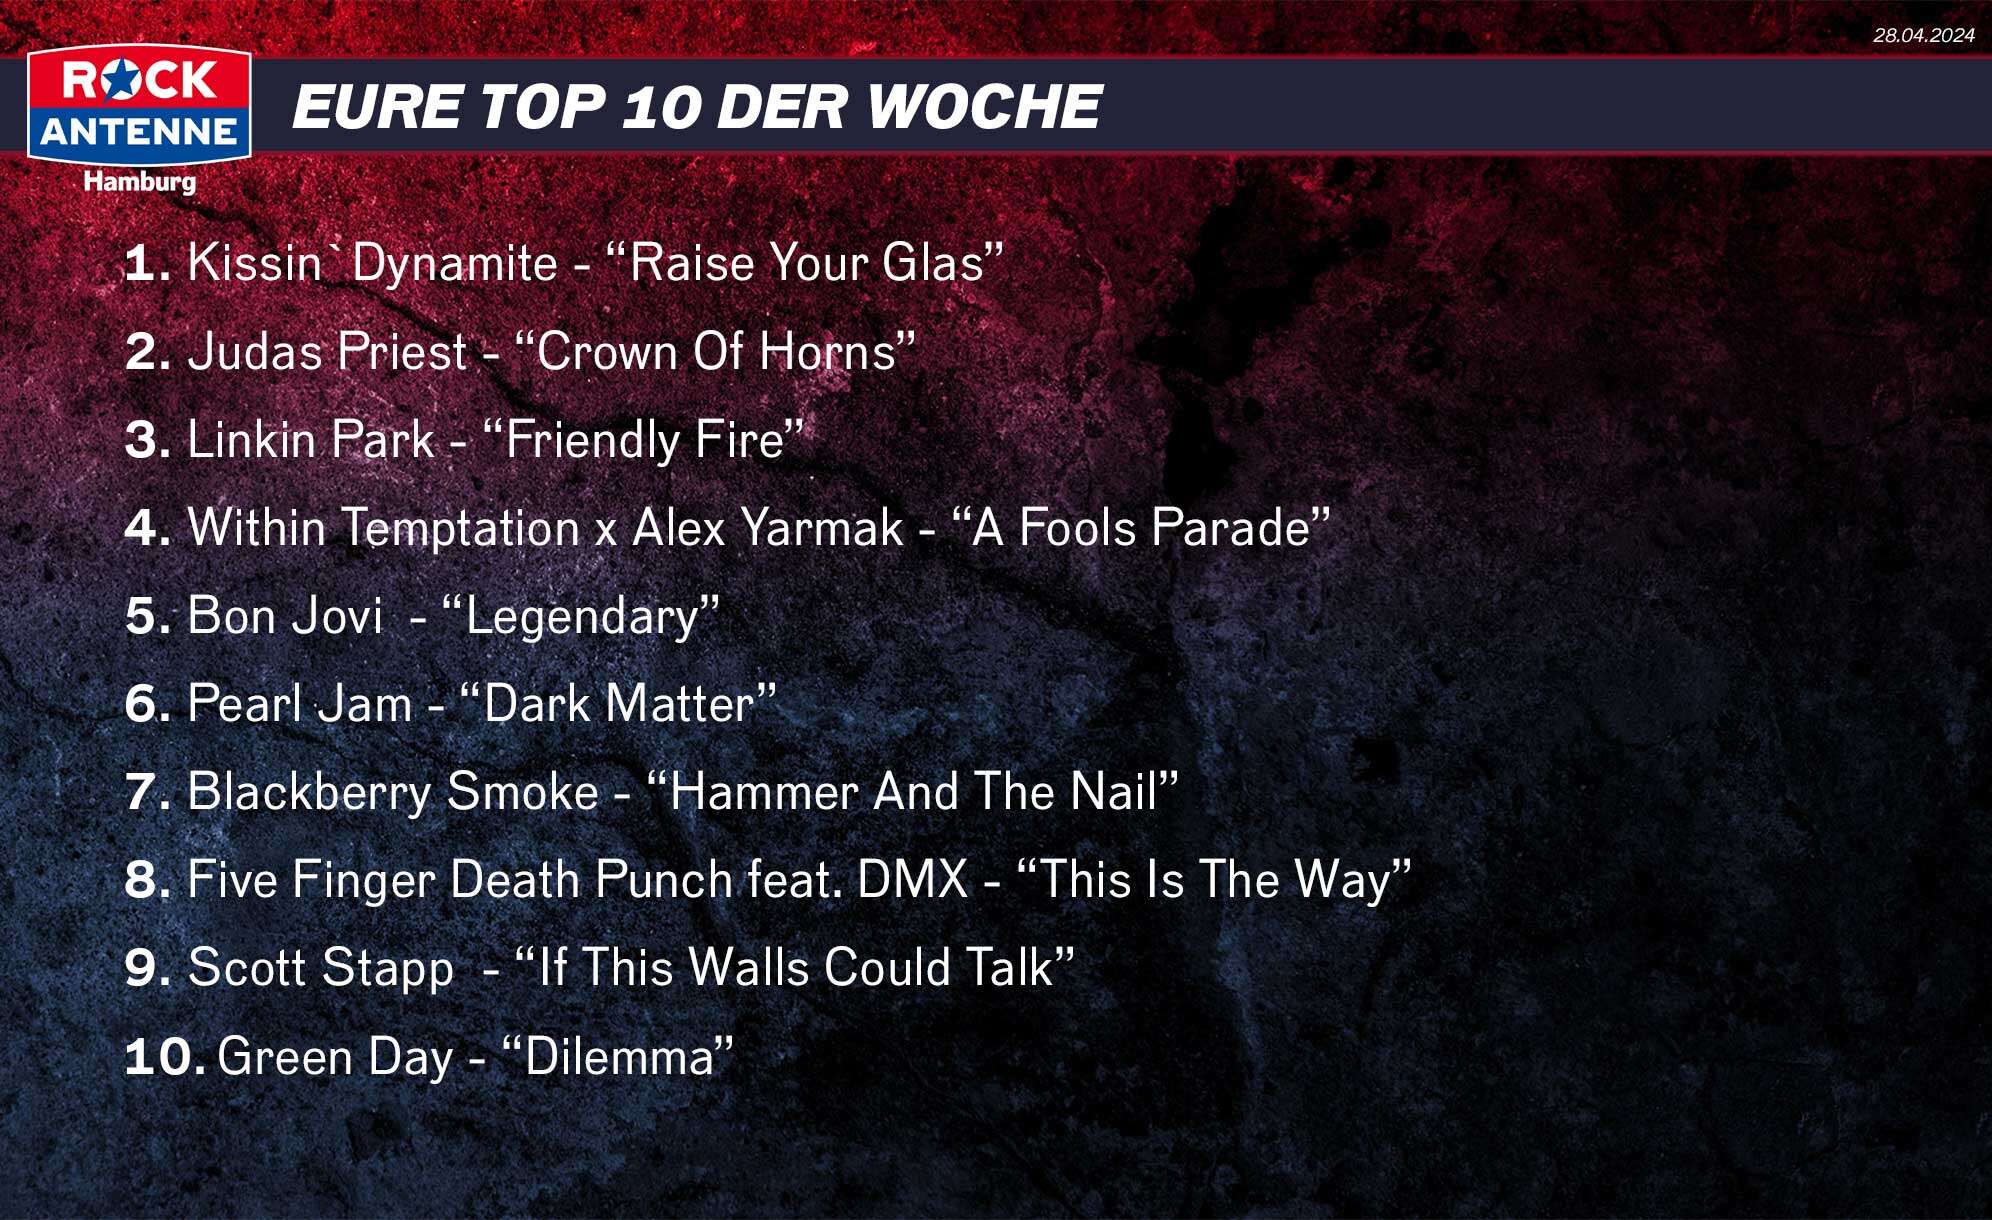 Die Top 10 der Woche vom 05.05.2024: 1. Kissin`Dynamite - “Raise Your Glas” 2. Judas Priest - “Crown Of Horns” 3. Linkin Park - “Friendly Fire” 4. Within Temptation x Alex Yarmak - “A Fools Parade” 5. Bon Jovi  - “Legendary” 6. Pearl Jam - “Dark Matter” 7. Blackberry Smoke - “Hammer And The Nail” 8. Five Finger Death Punch feat. DMX - “This Is The Way” 9. Scott Stapp  - “If This Walls Could Talk” 10. Green Day - “Dilemma”